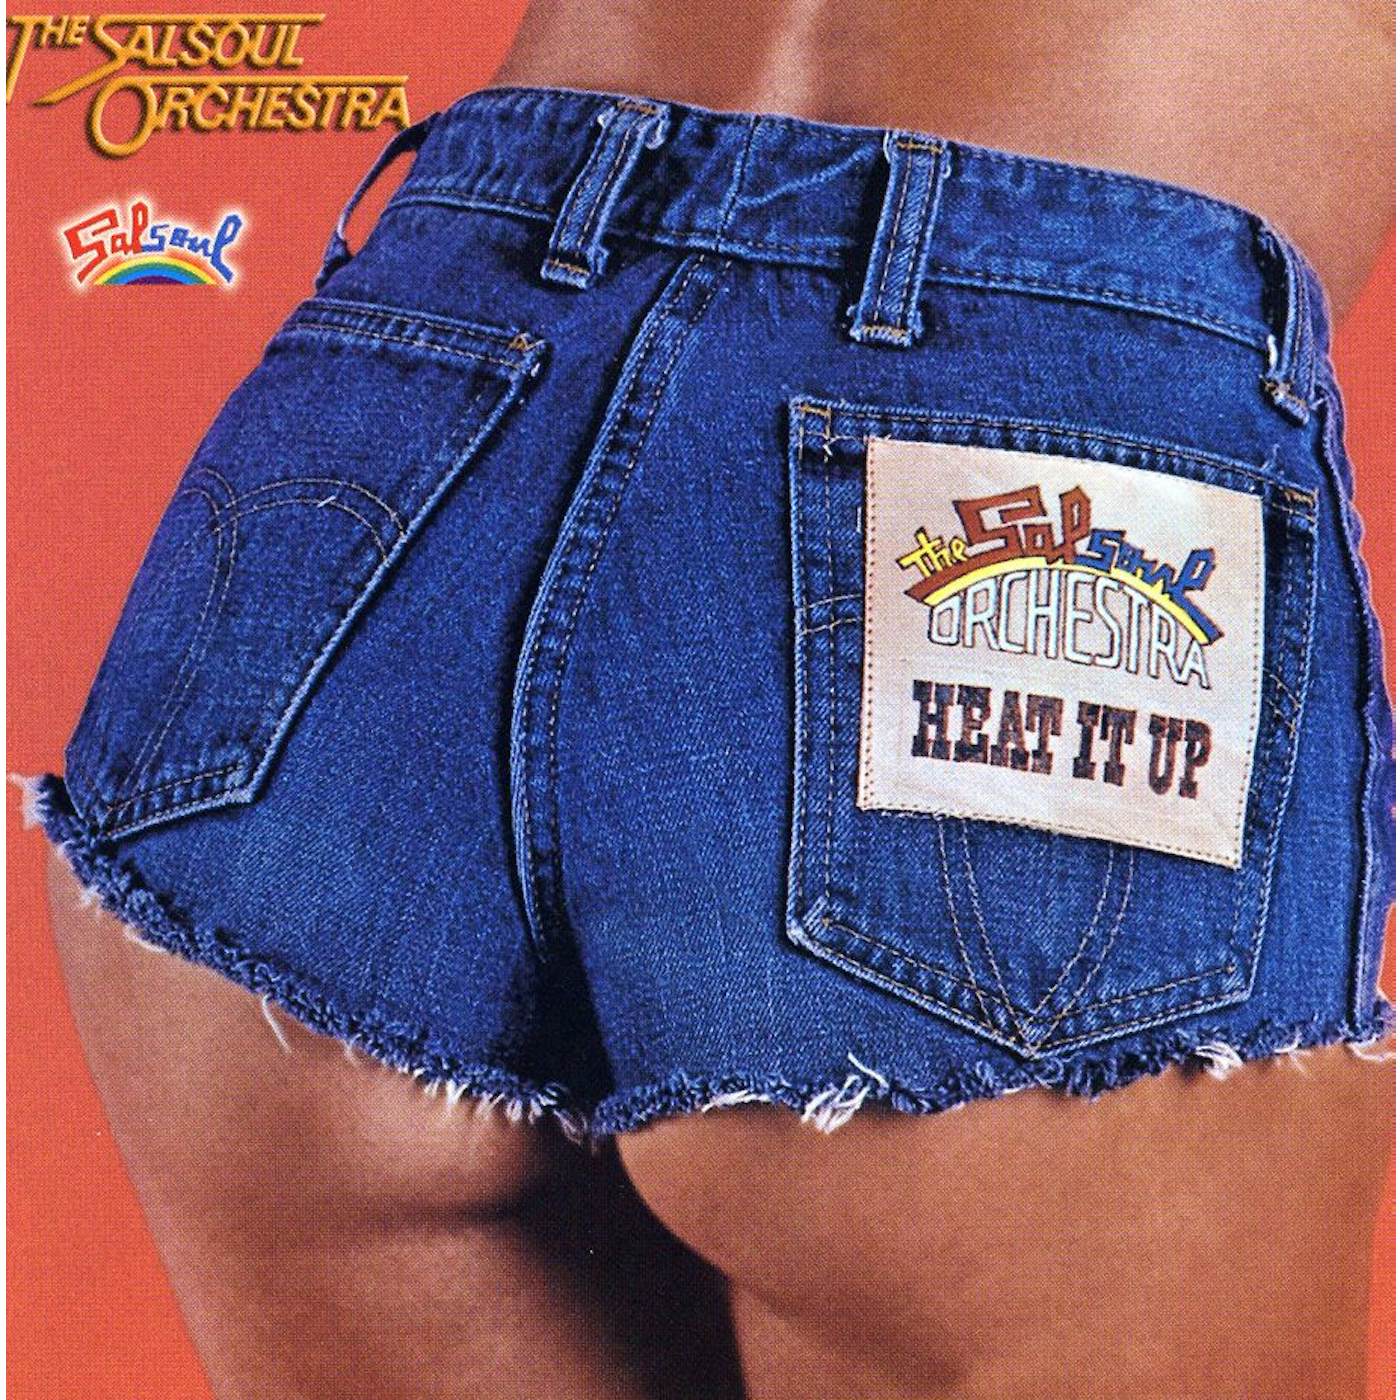 The Salsoul Orchestra HEAT IT UP CD